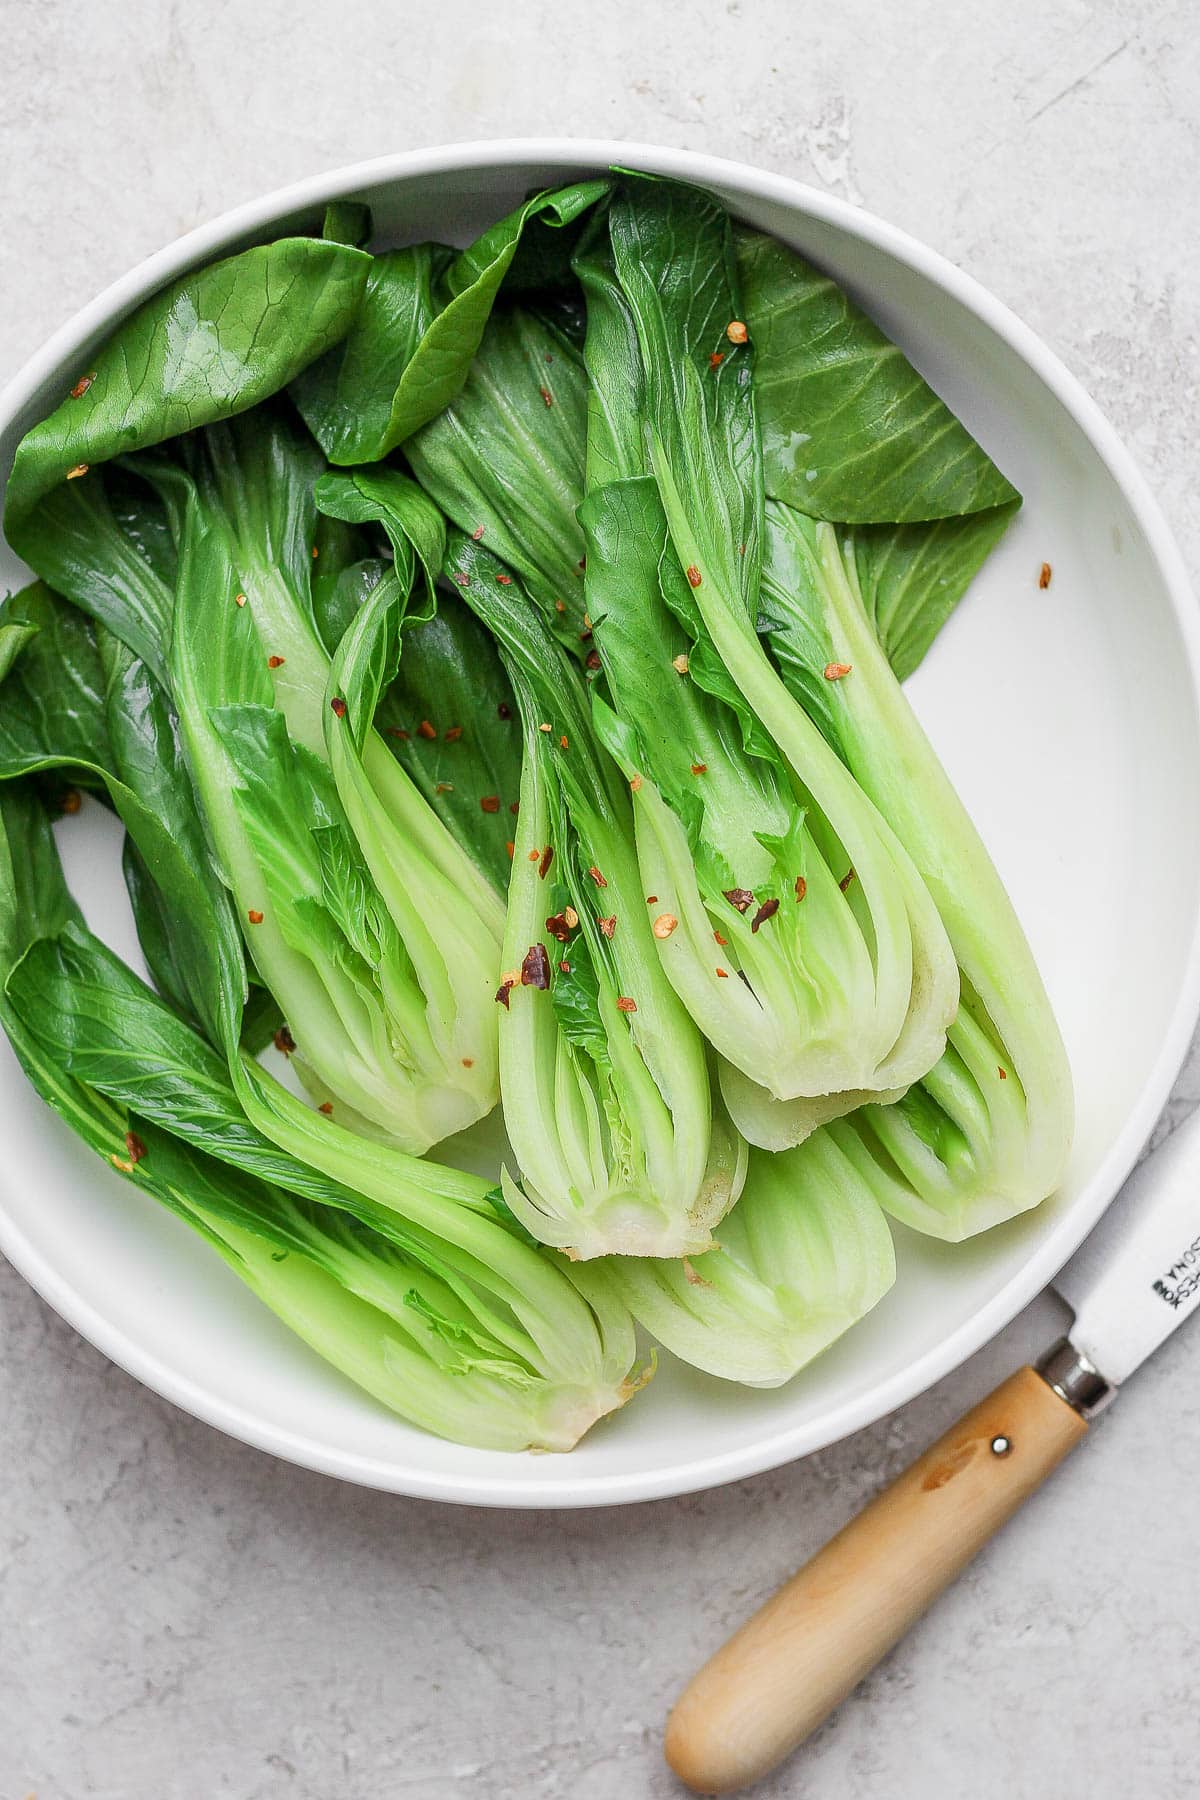 Cooked bok choy on a plate.